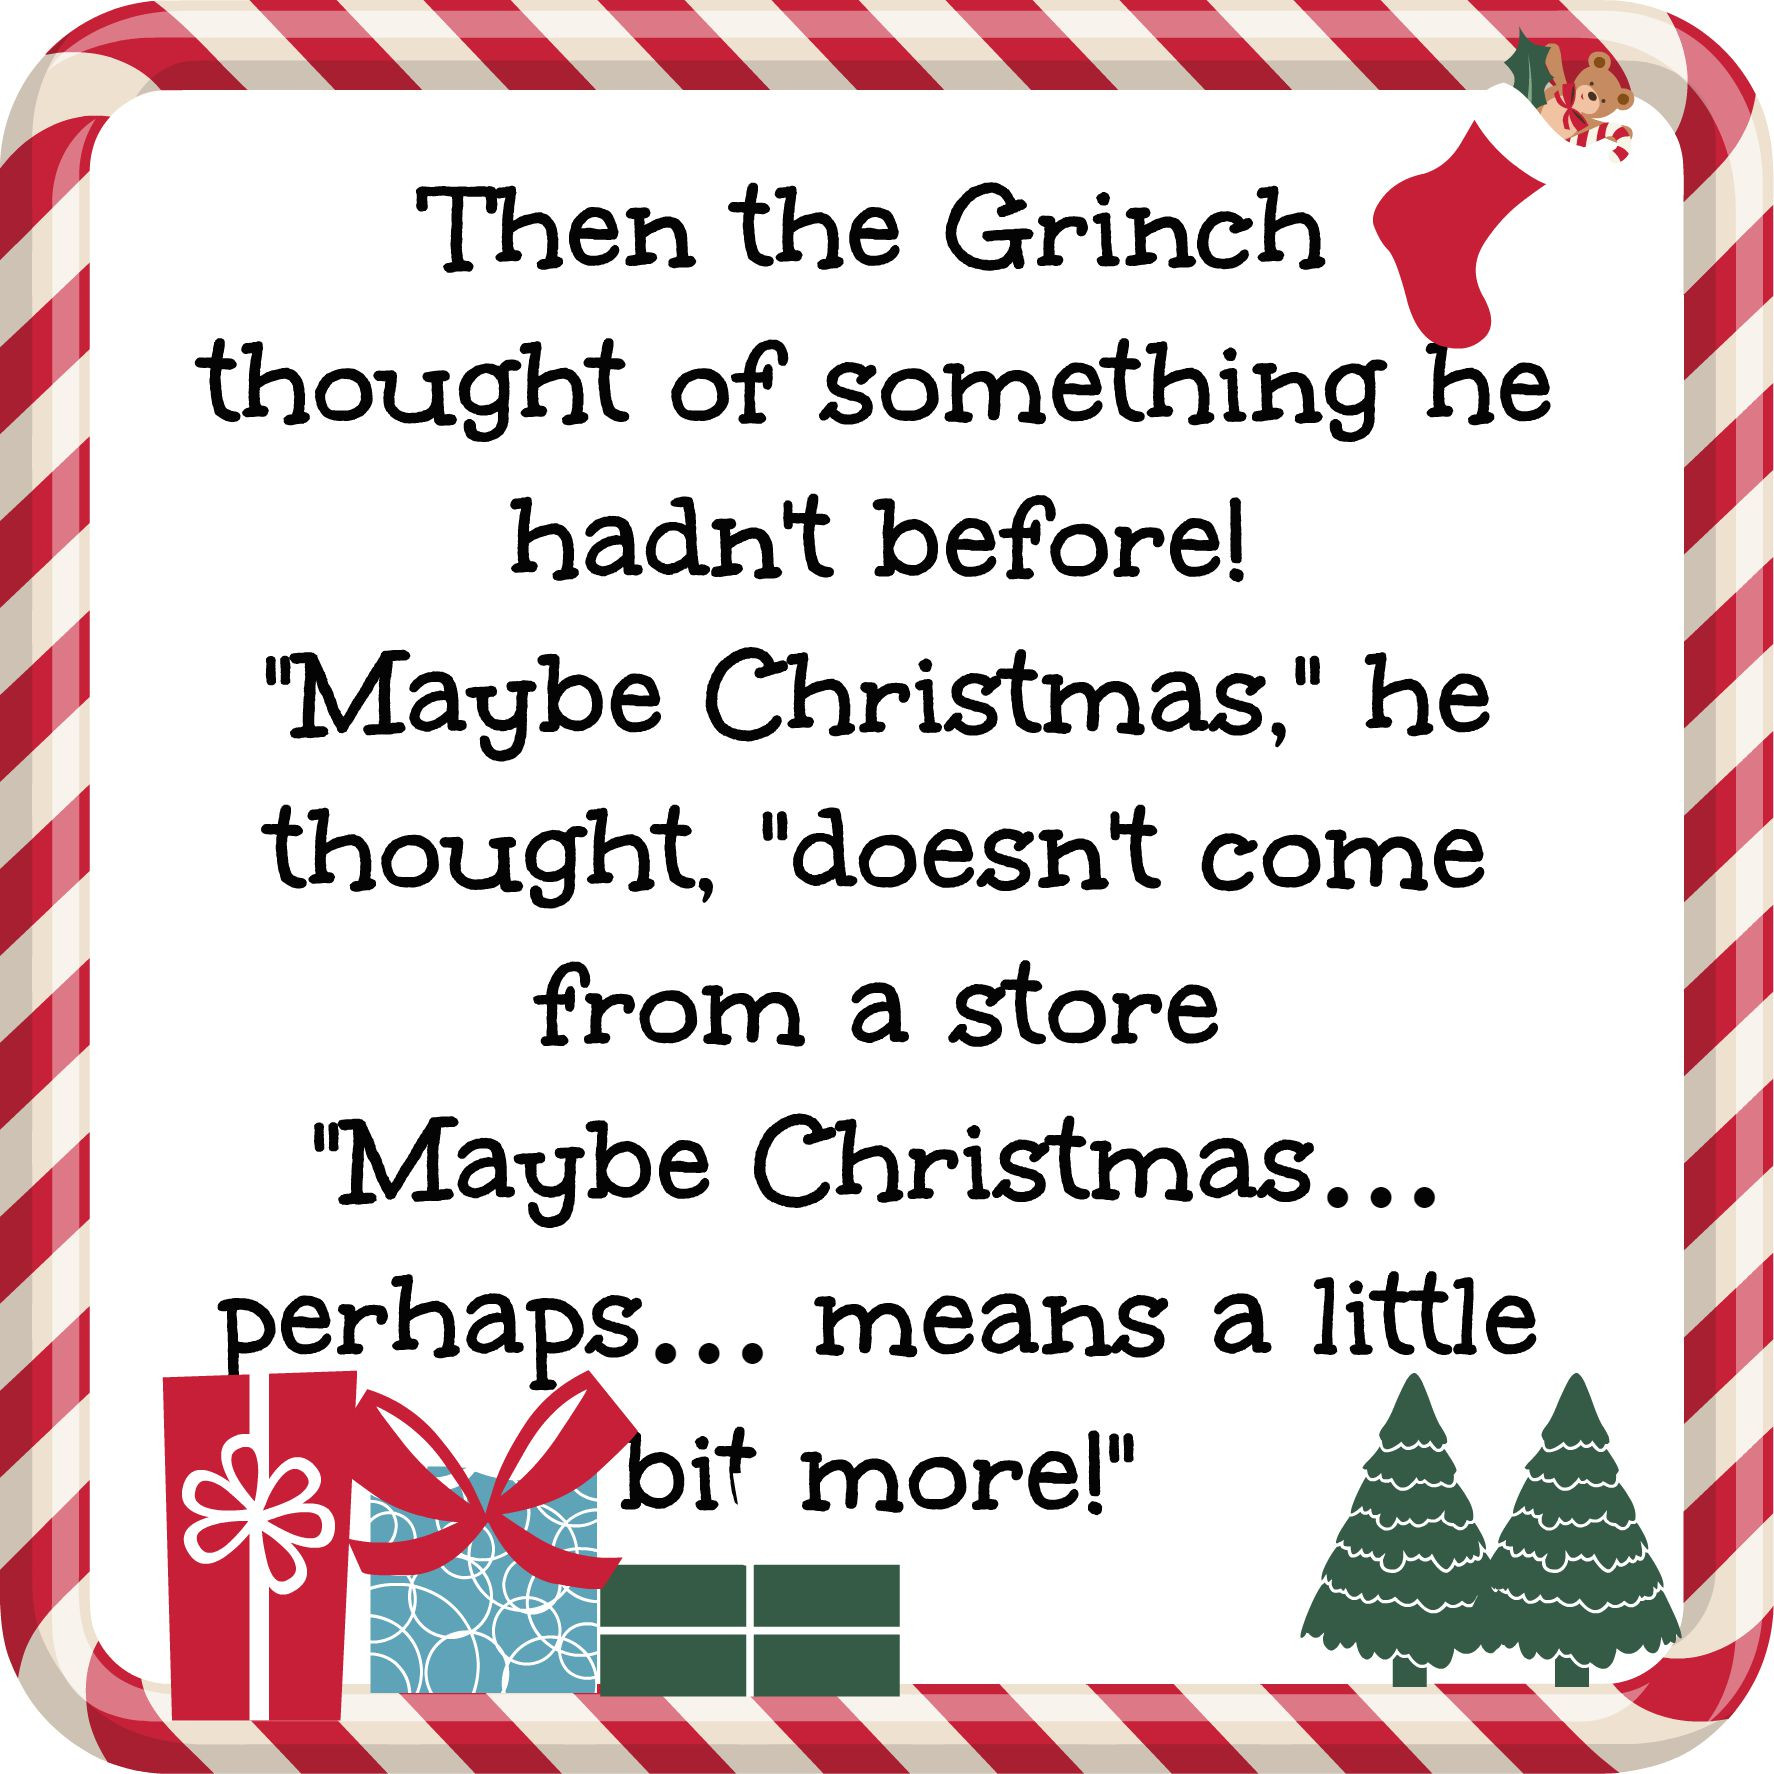 Grinch Christmas Quote
 Making a Case for the Grinch